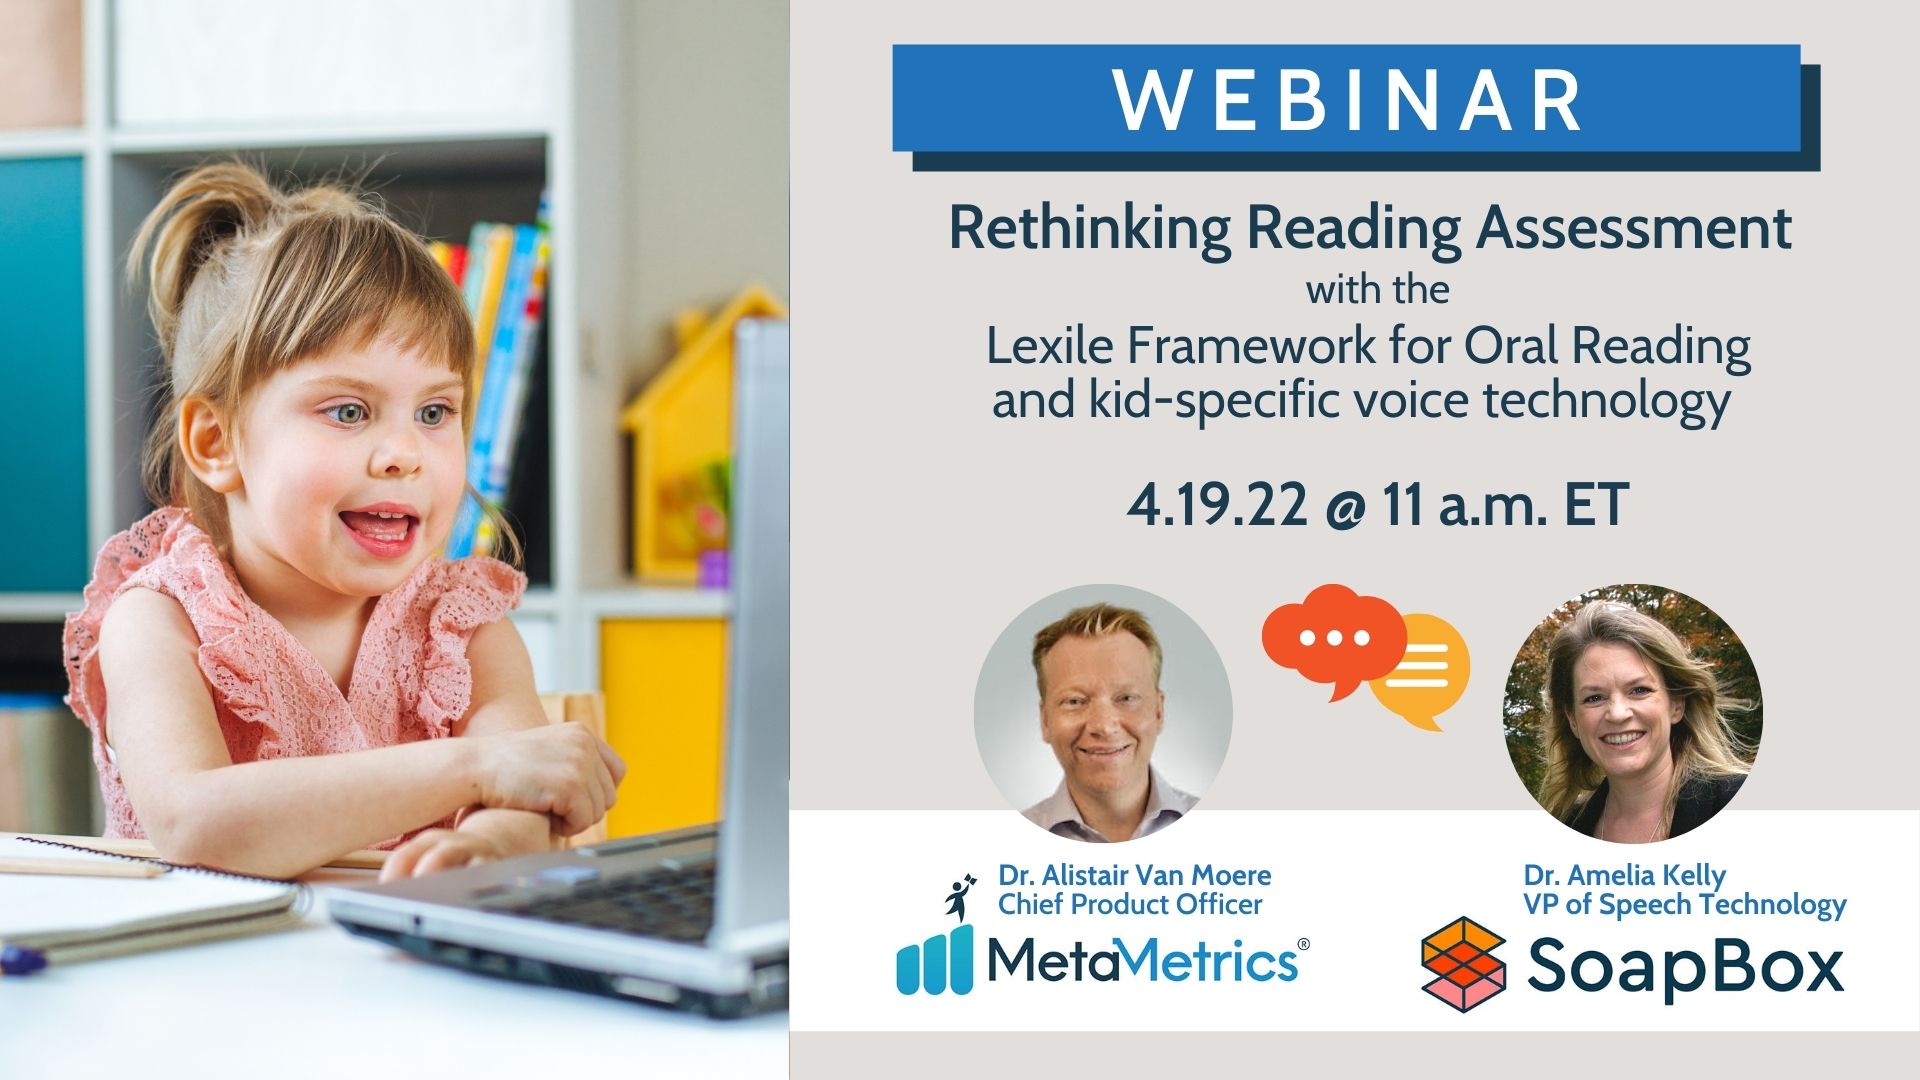 An image with text that says, "Webinar: Rethinking reading assessment with the Lexile Framework for Oral Reading and kid-specific voice technology."